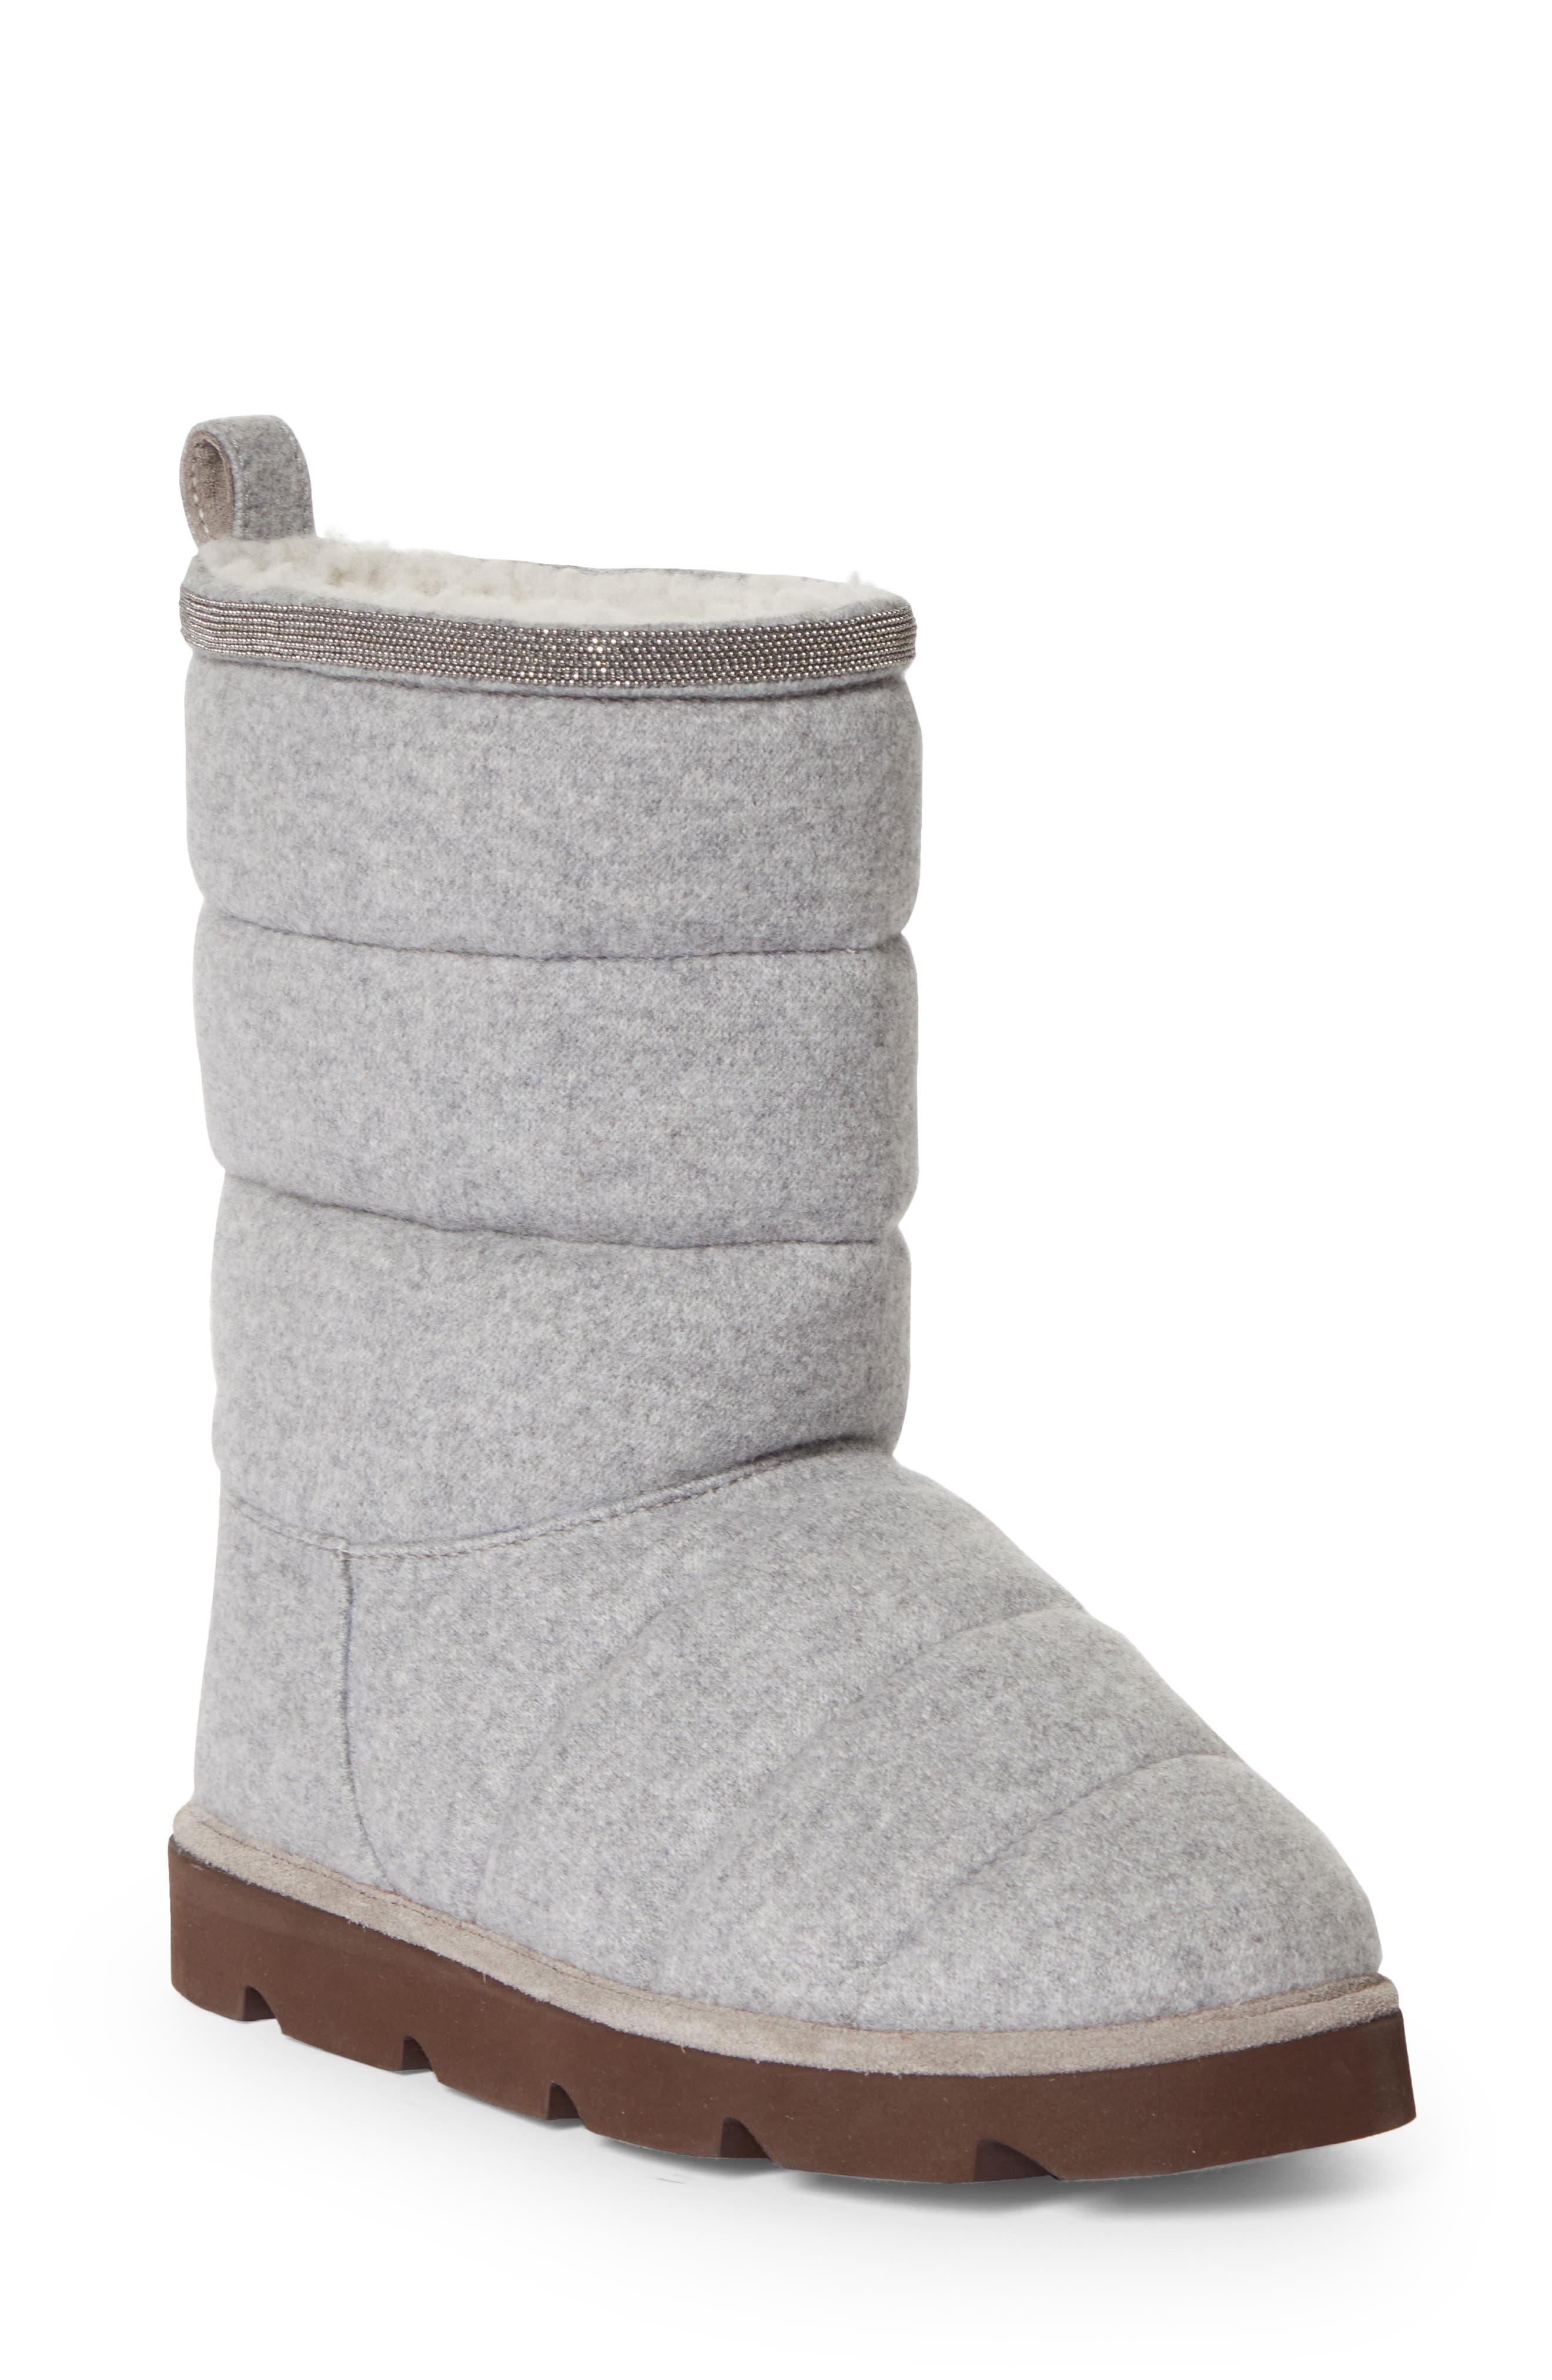 Brunello Cucinelli Genuine Shearling Lined Boot in Grey at Nordstrom, Size 5.5Us